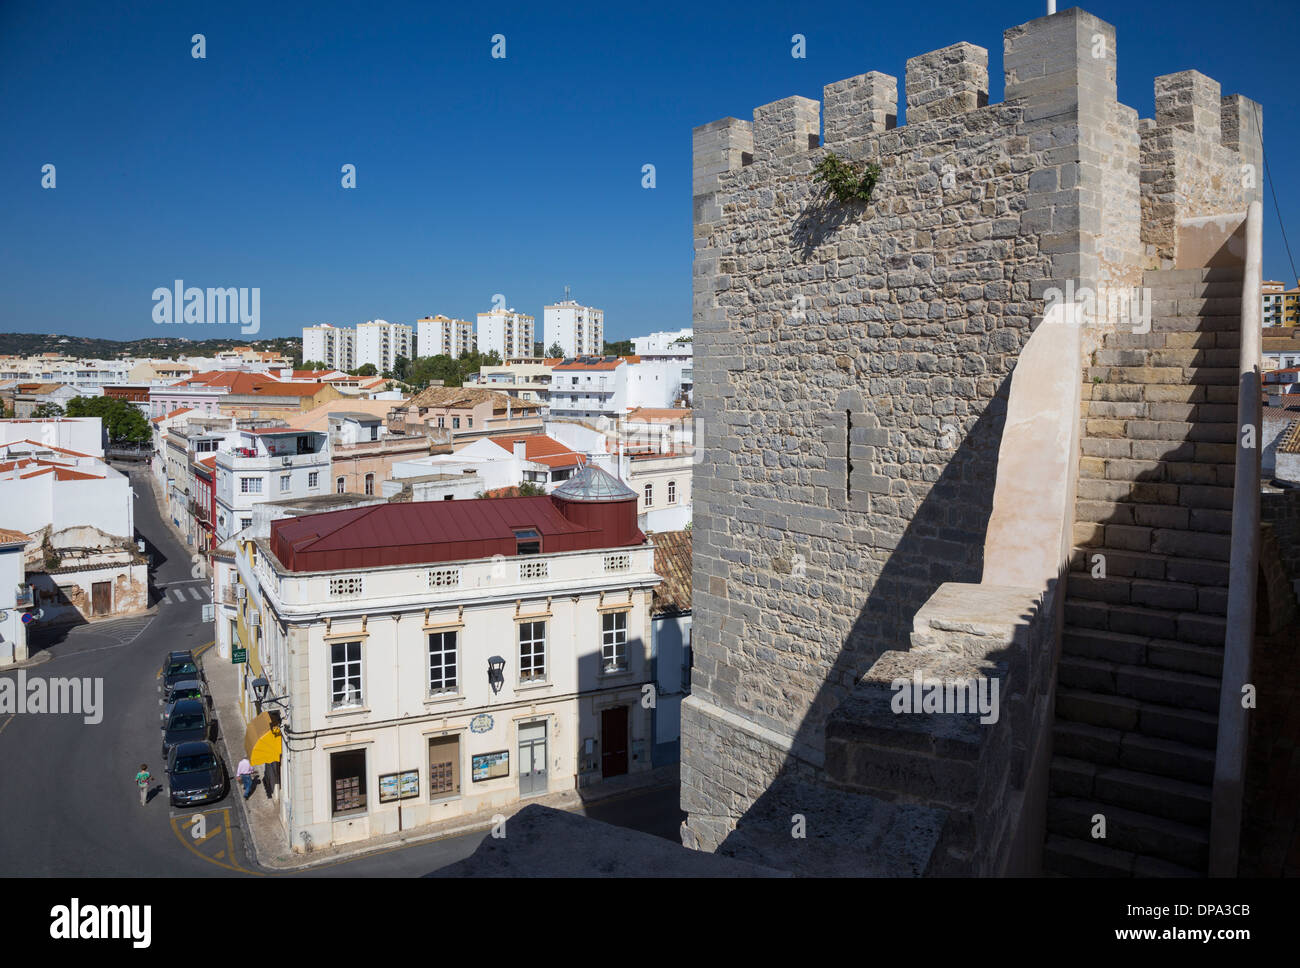 Loule from the castle, Algarve, Portugal Stock Photo